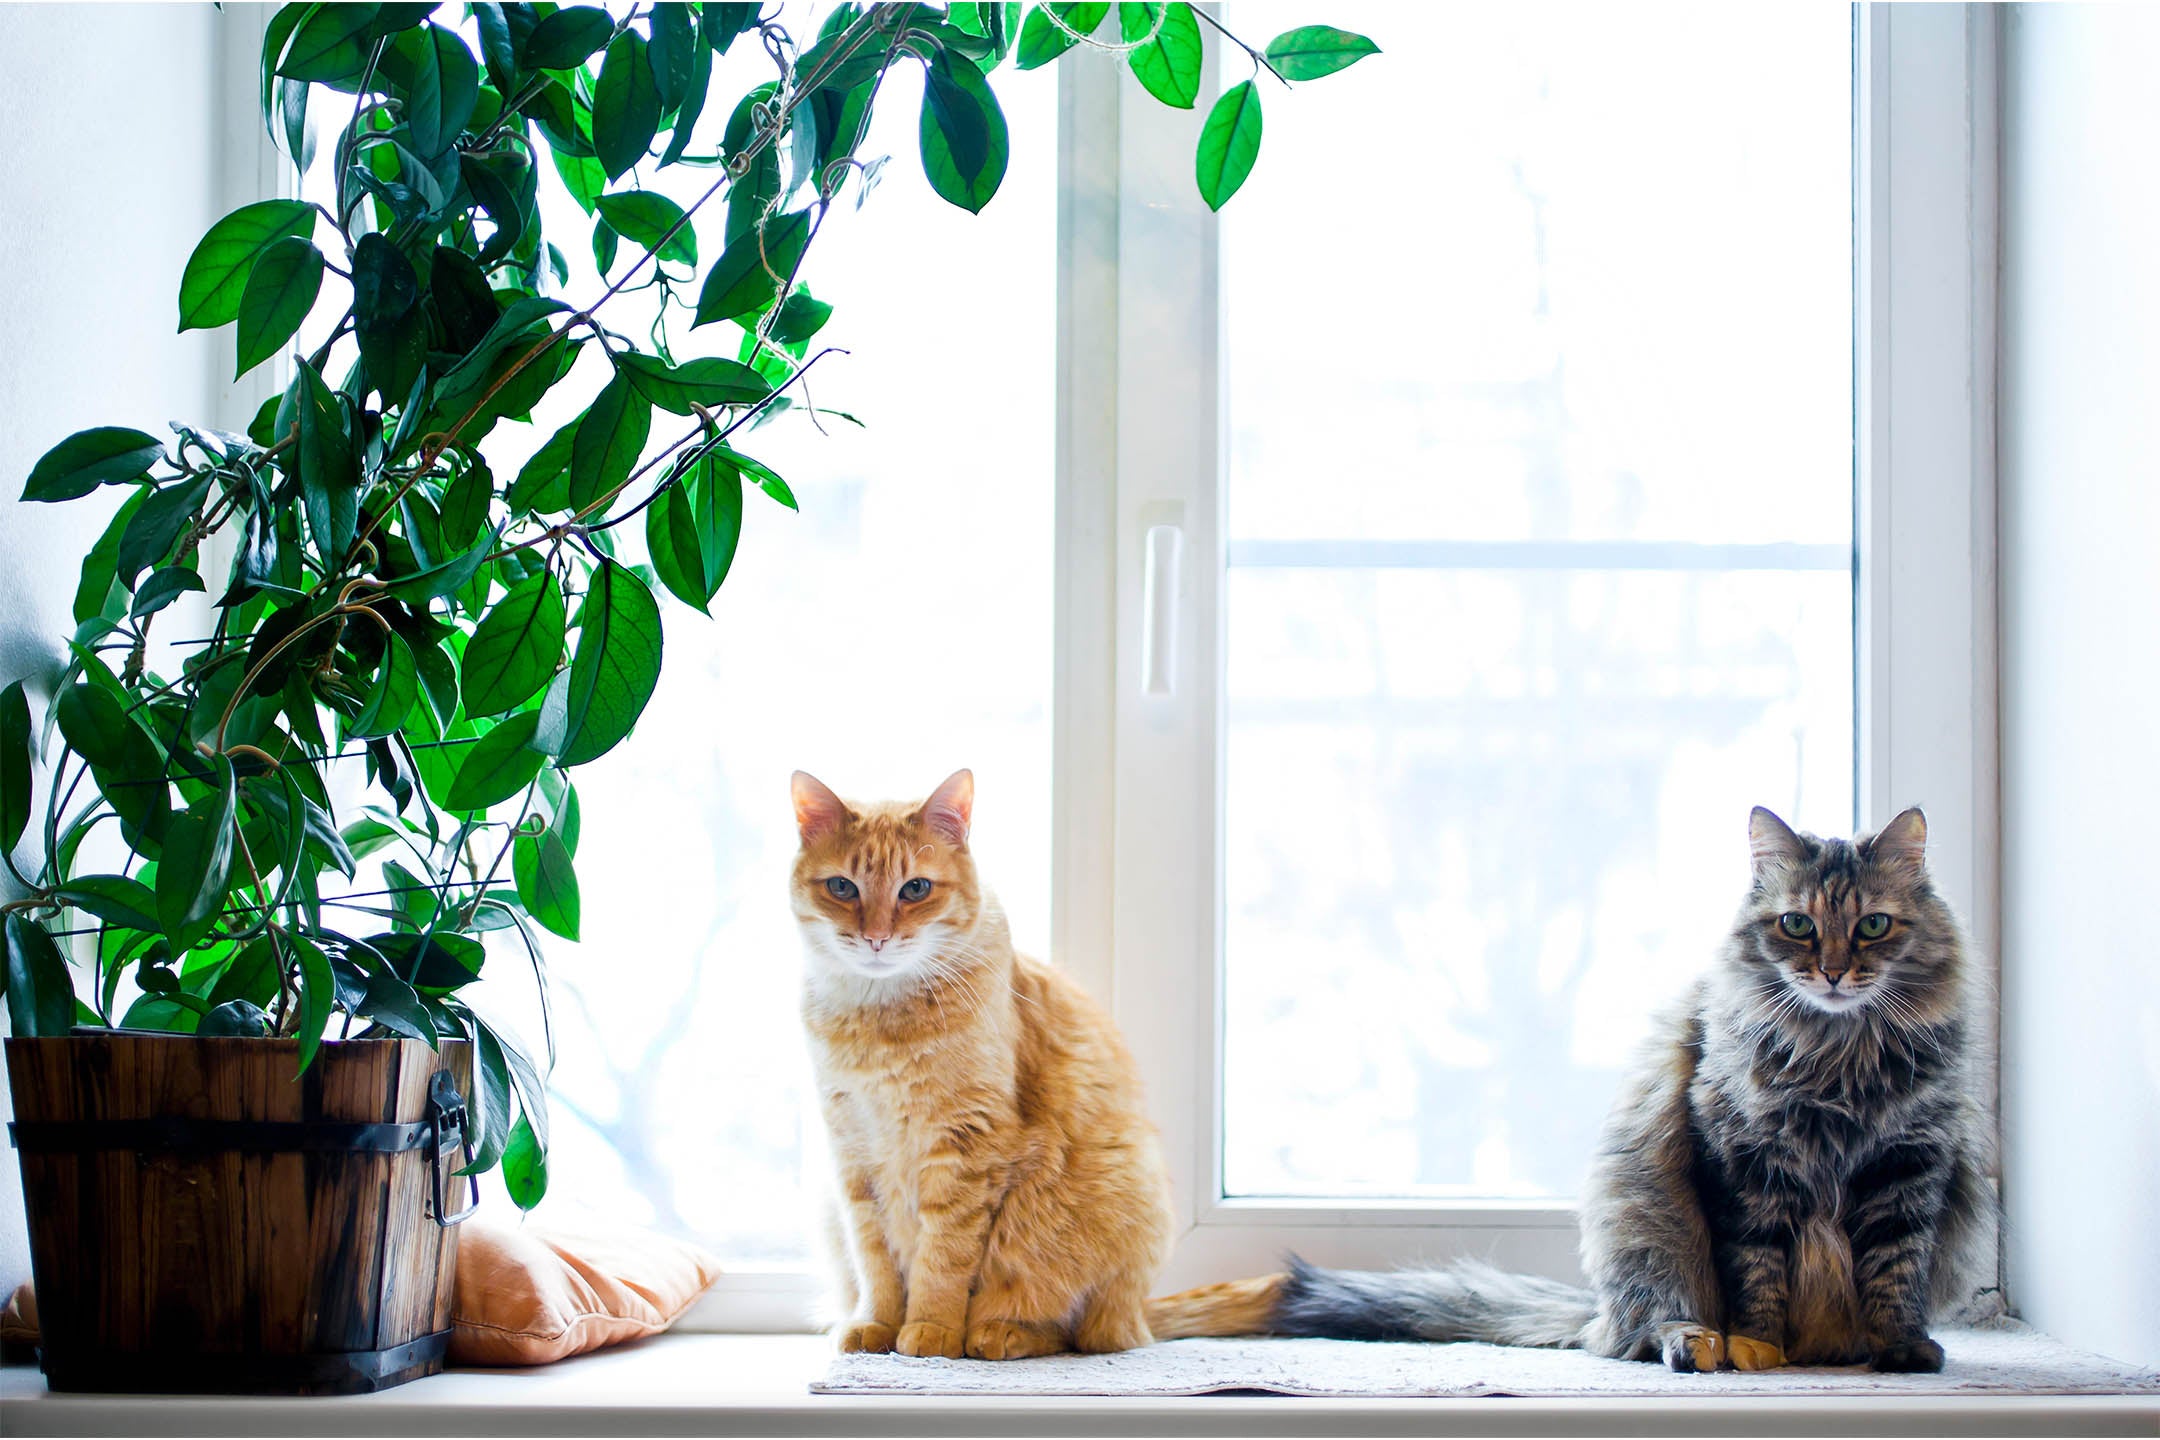 What Indoor Plants Are Toxic to Cats? Top 10 Plants to Avoid